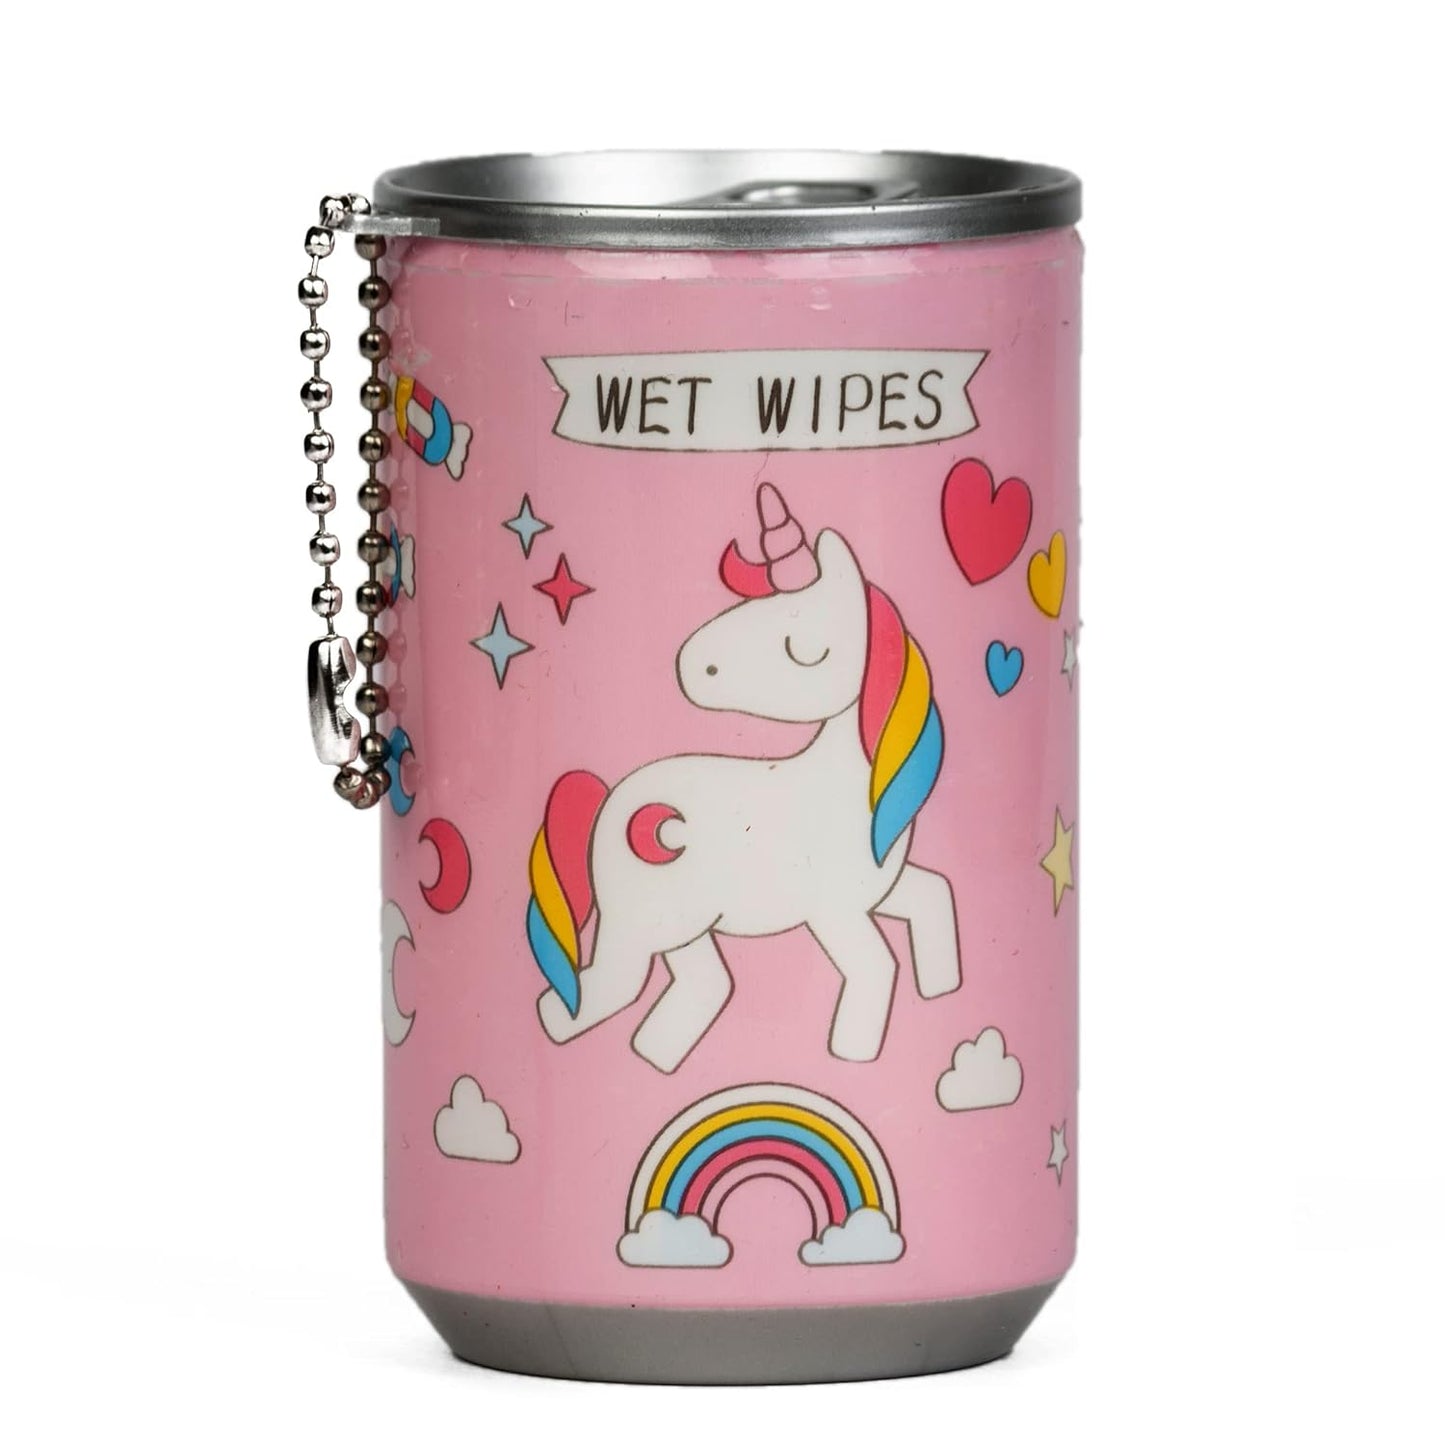 ART & CRAFT Cute Funky Unicorn Tin Shape Mini Wet Wipes Tissue, Extremely Portable Tin Cream/Pink Color (PACK OF 1)